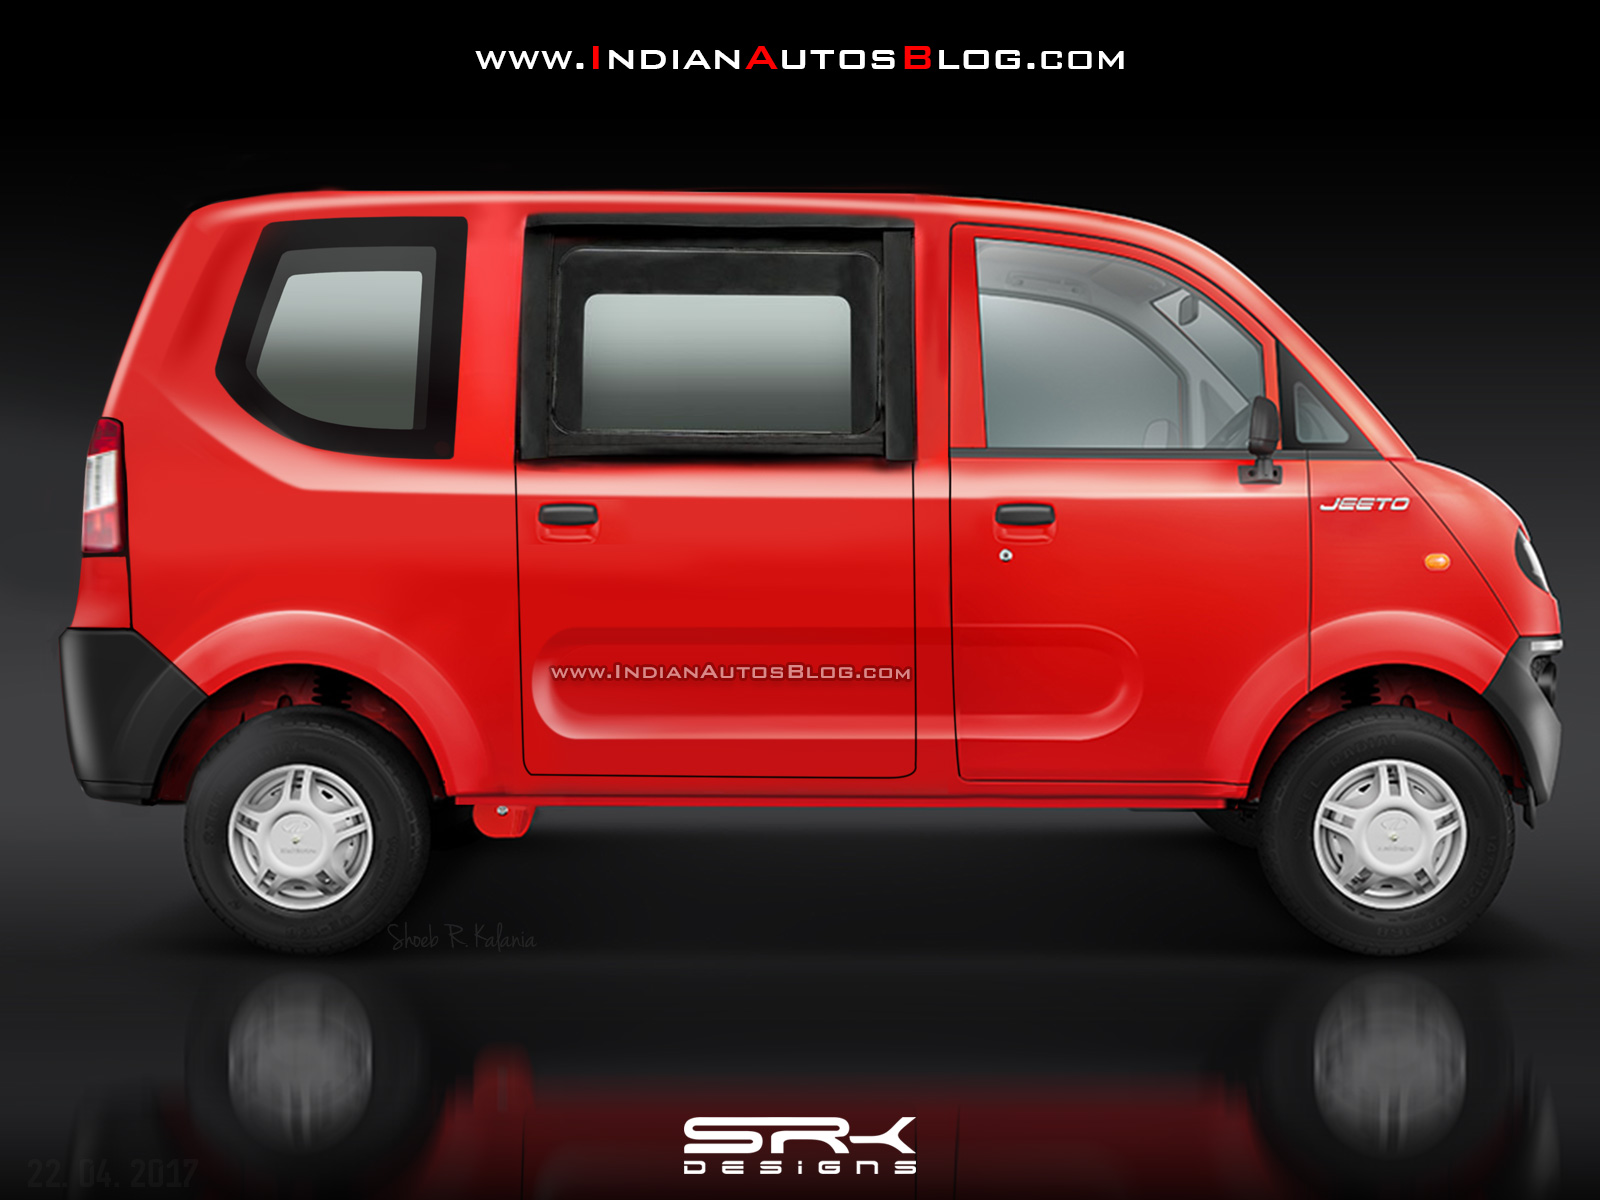 Learn More About The Mahindra Jeeto Passenger Van